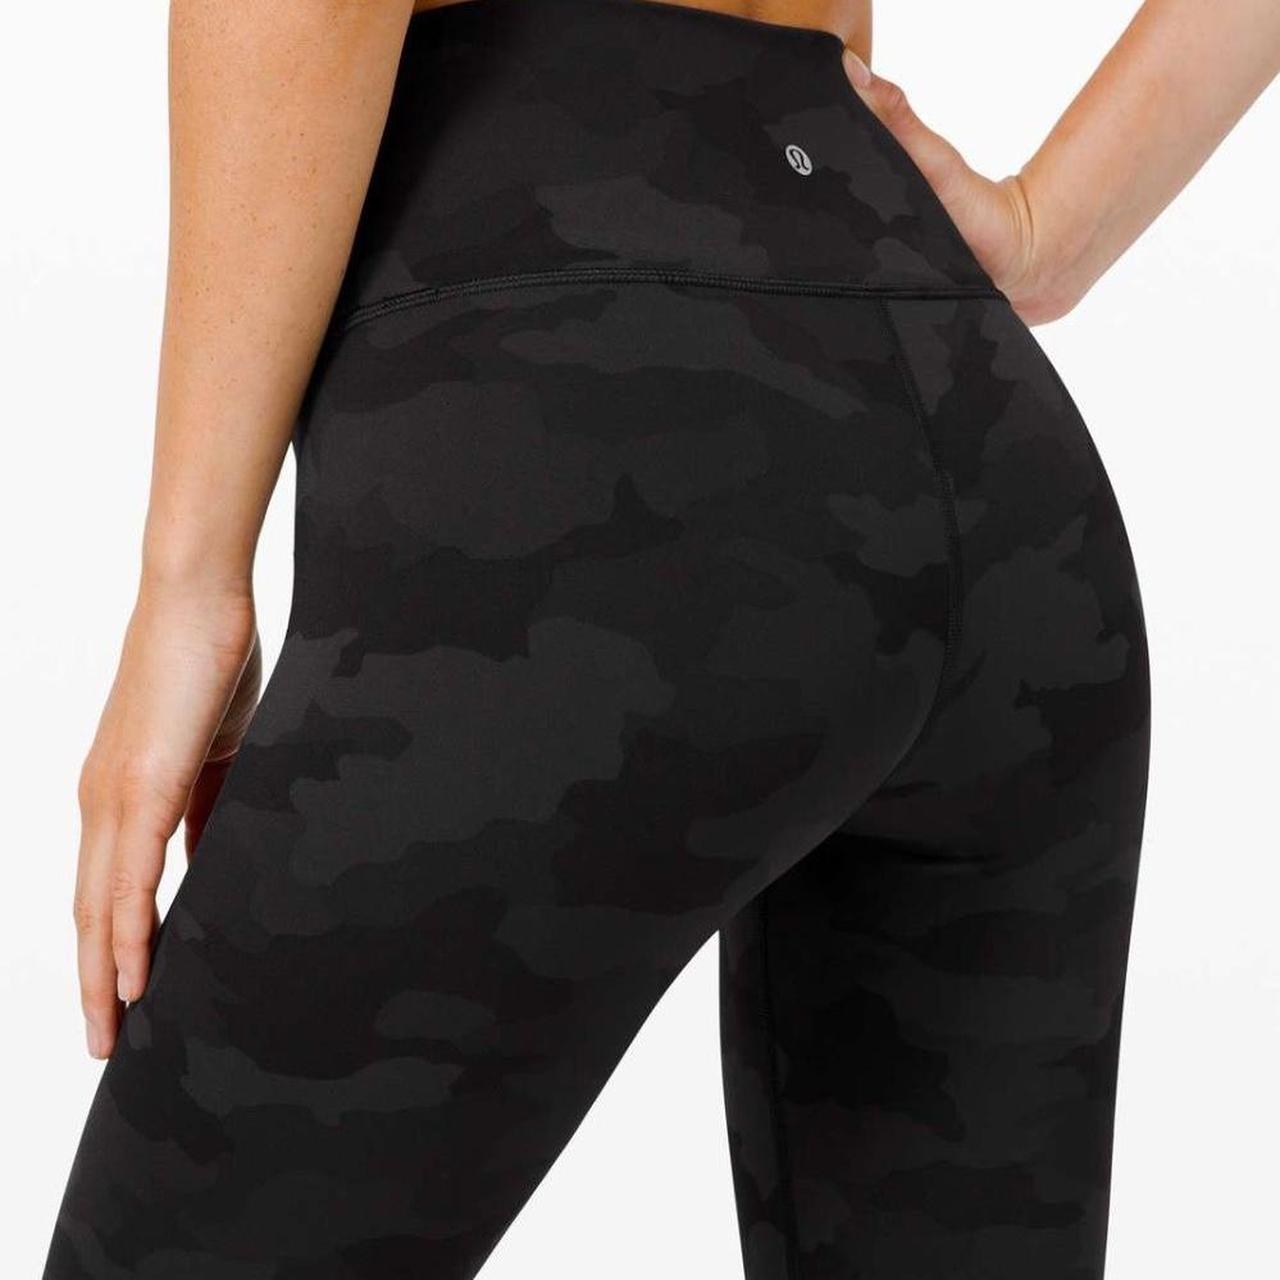 Lululemon Camo Leggings, size 4. worn once to try